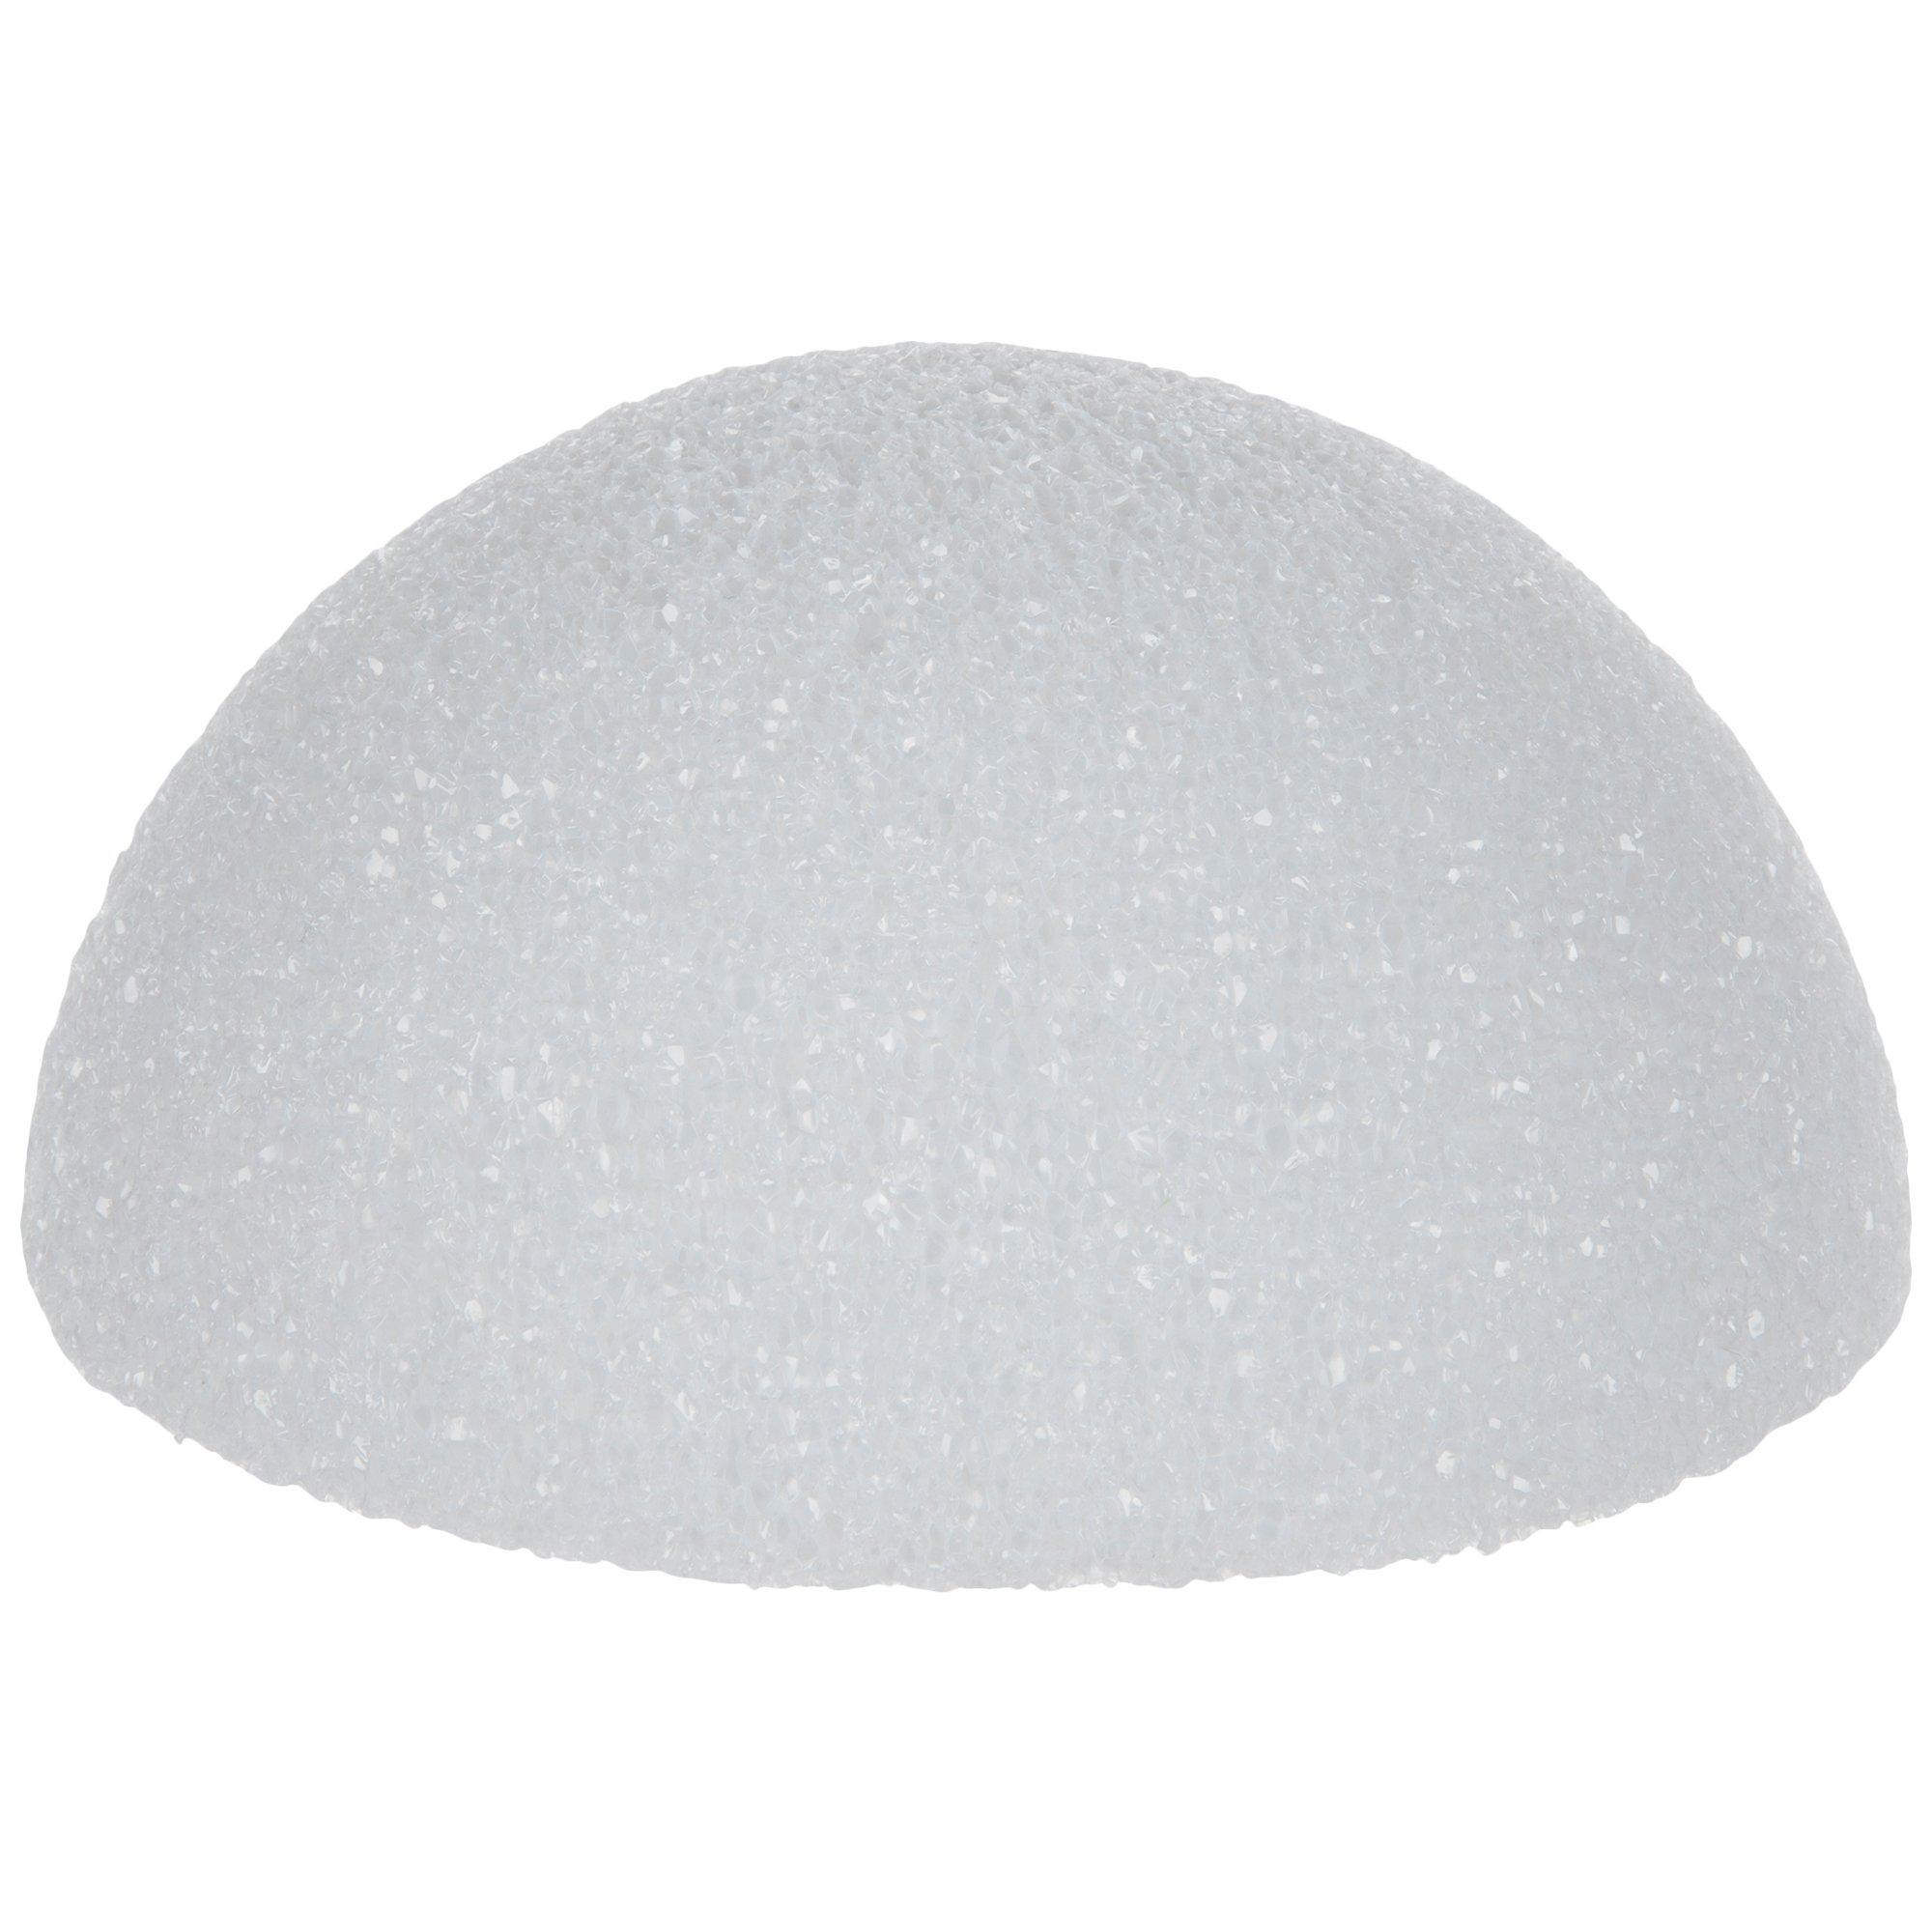 126 Pack Craft Foam Balls, 5 Sizes Including 1-2.4 Inches, Polystyrene Smooth RO